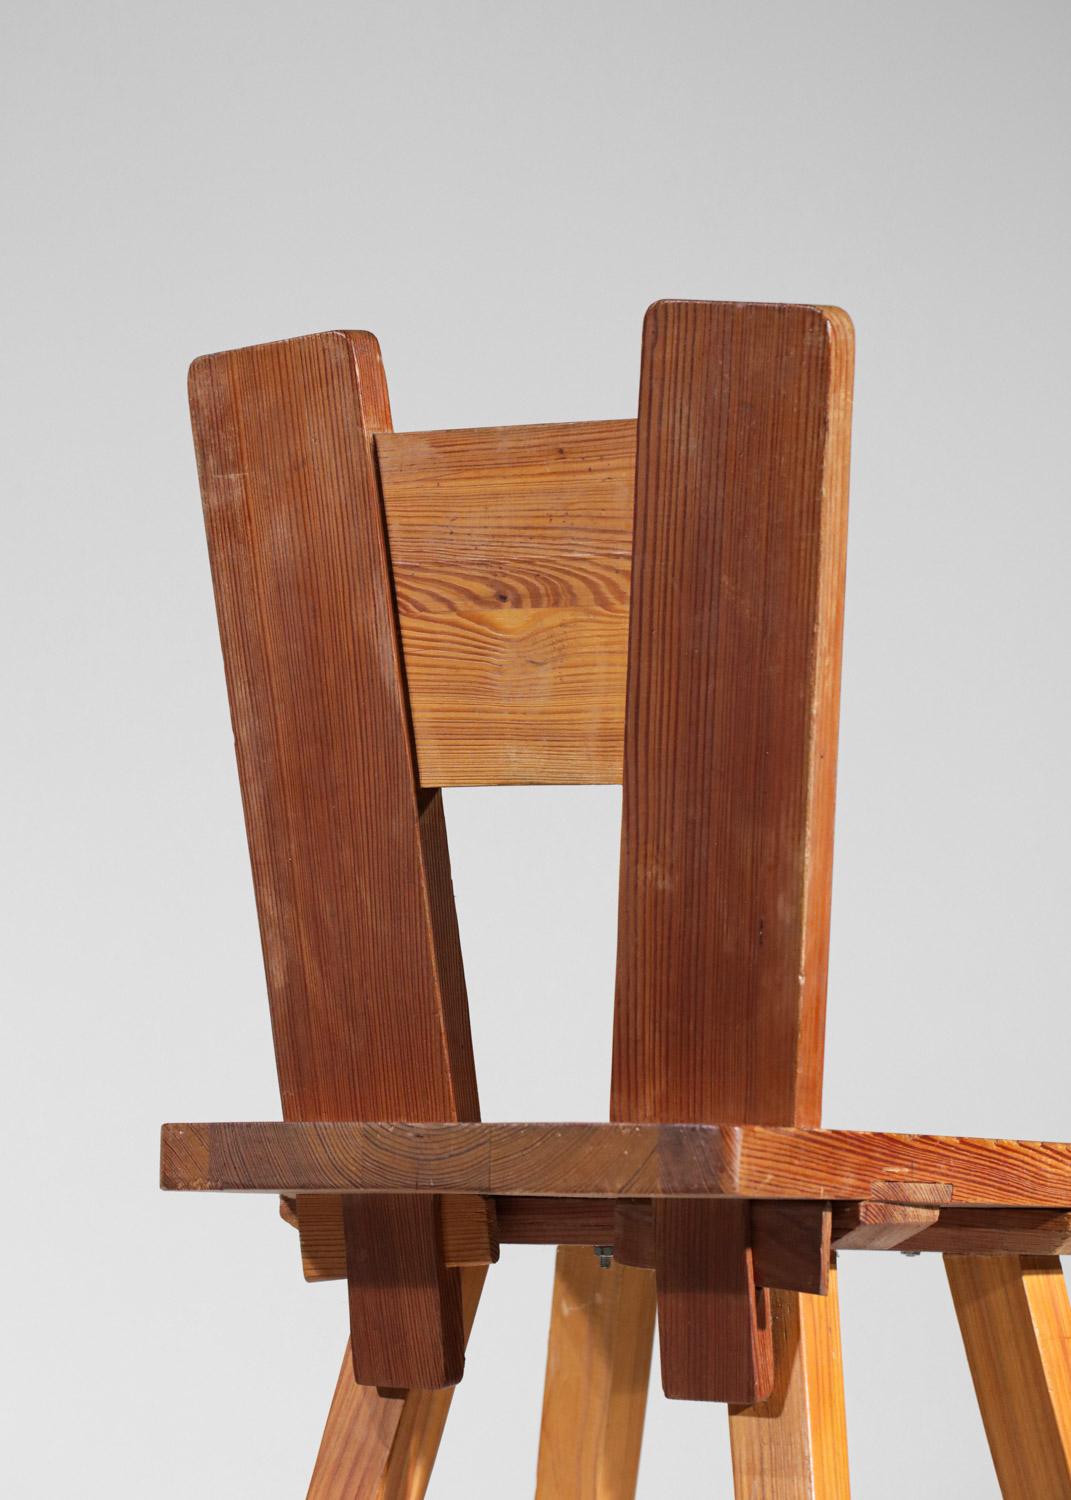 Mid-Century Modern French Pine chair 1960s style Christian Durupt Henry Jacques Le Même perriand